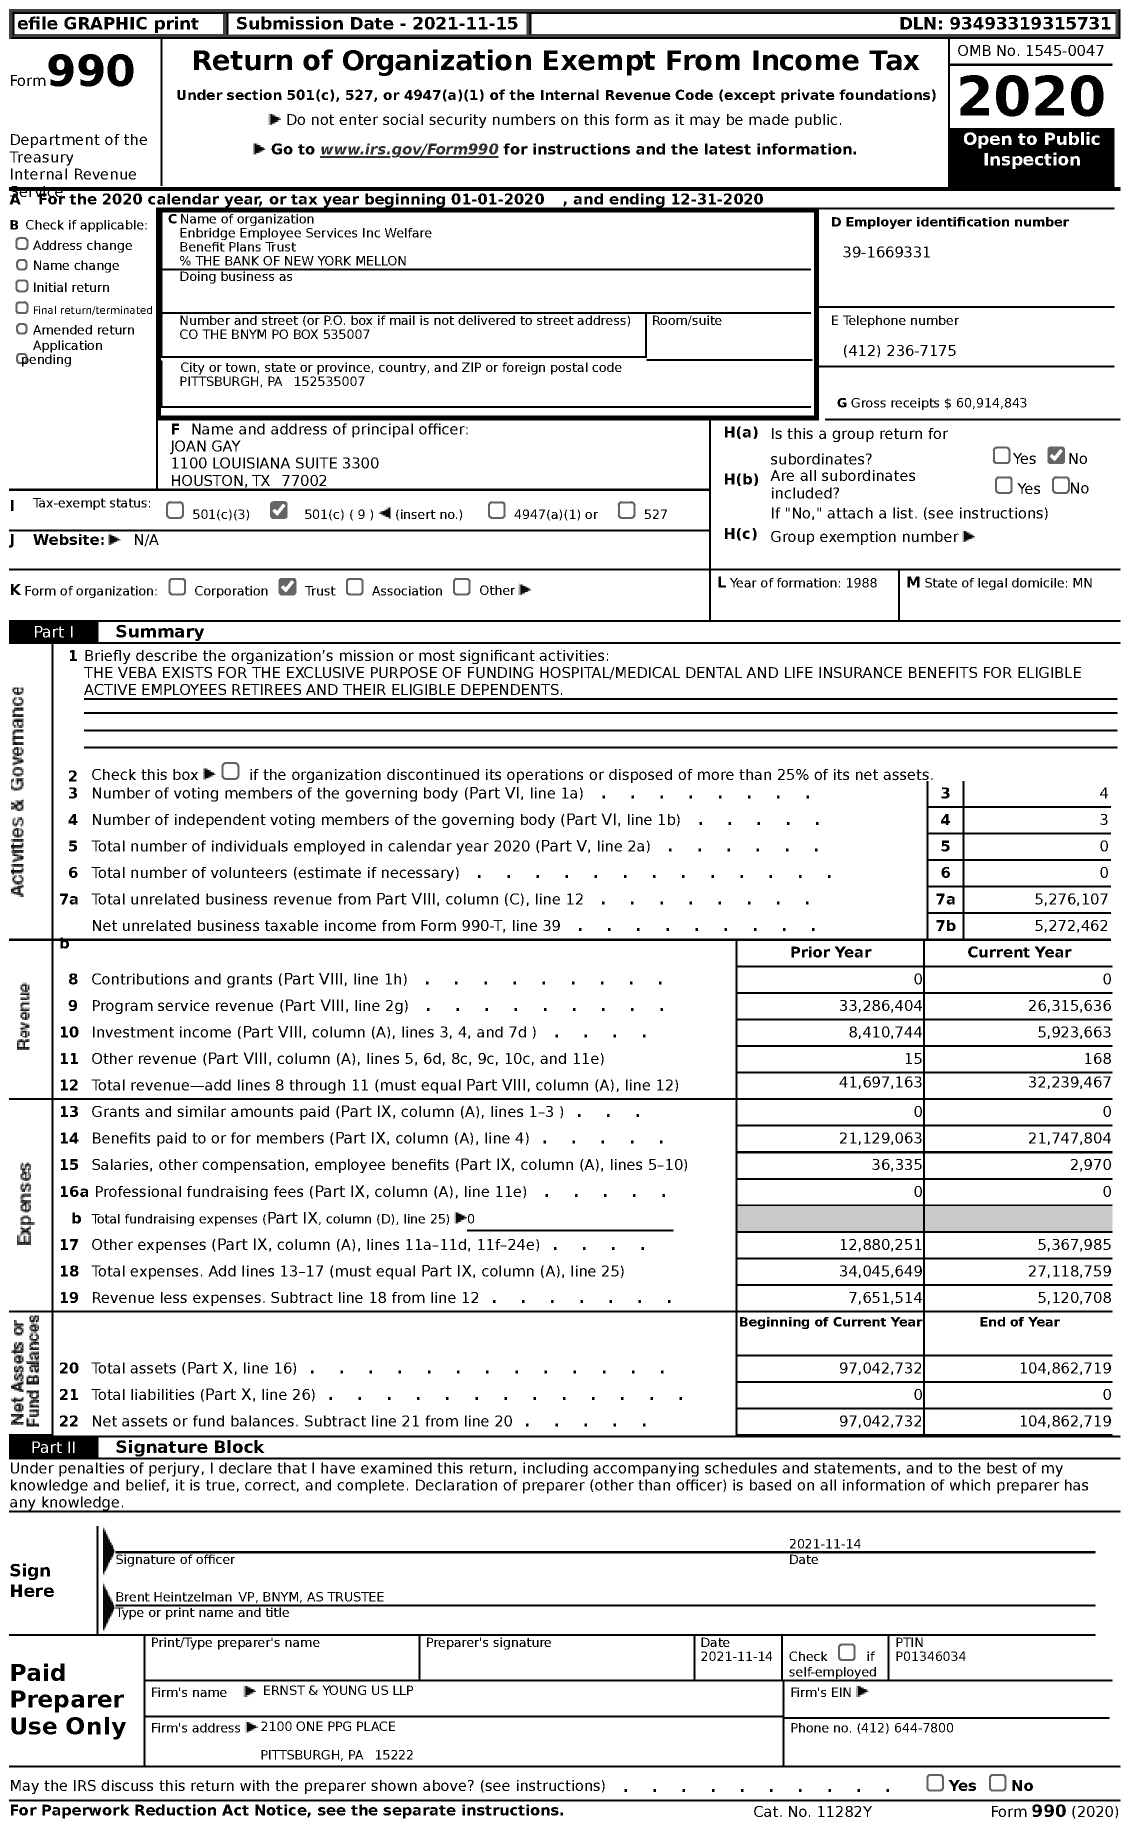 Image of first page of 2020 Form 990 for Enbridge Employee Services Inc Welfare Benefit Plans Trust